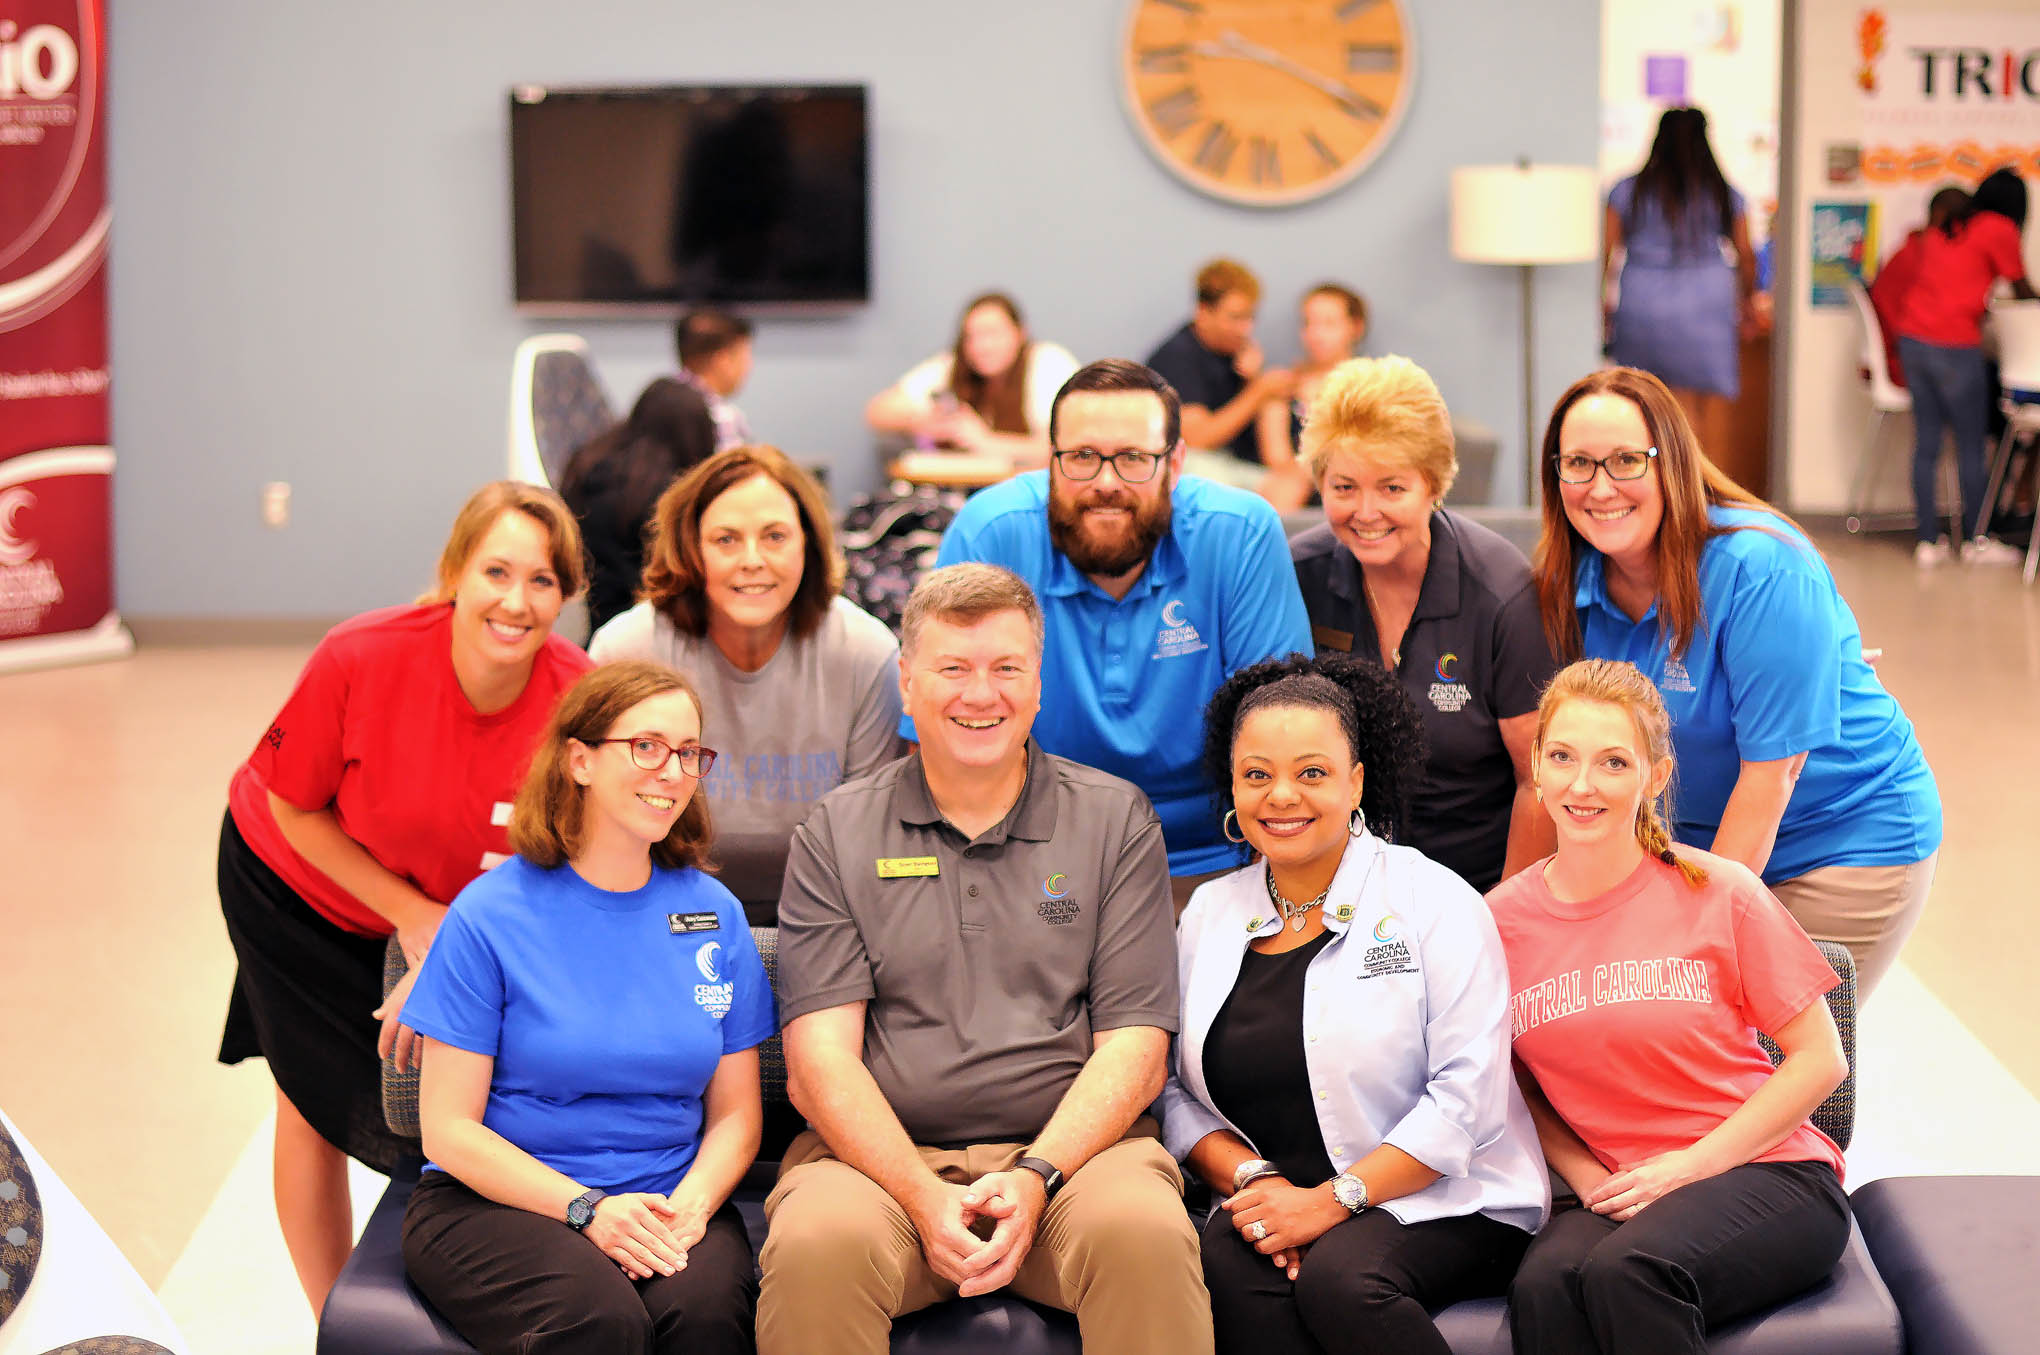 Click to enlarge,  This team of Central Carolina Community College employees (as well as others who are not pictured) has worked tirelessly to transform admissions and advising processes to ensure a more personalized approach that enables new students to make efficient, effective, and timely choices in order to complete their educational and career goals. Thanks to these efforts, CCCC is among a list of 30 community colleges selected as 2020 finalists for the highly coveted Bellwether Awards, according to an announcement from the Bellwether College Consortium. 